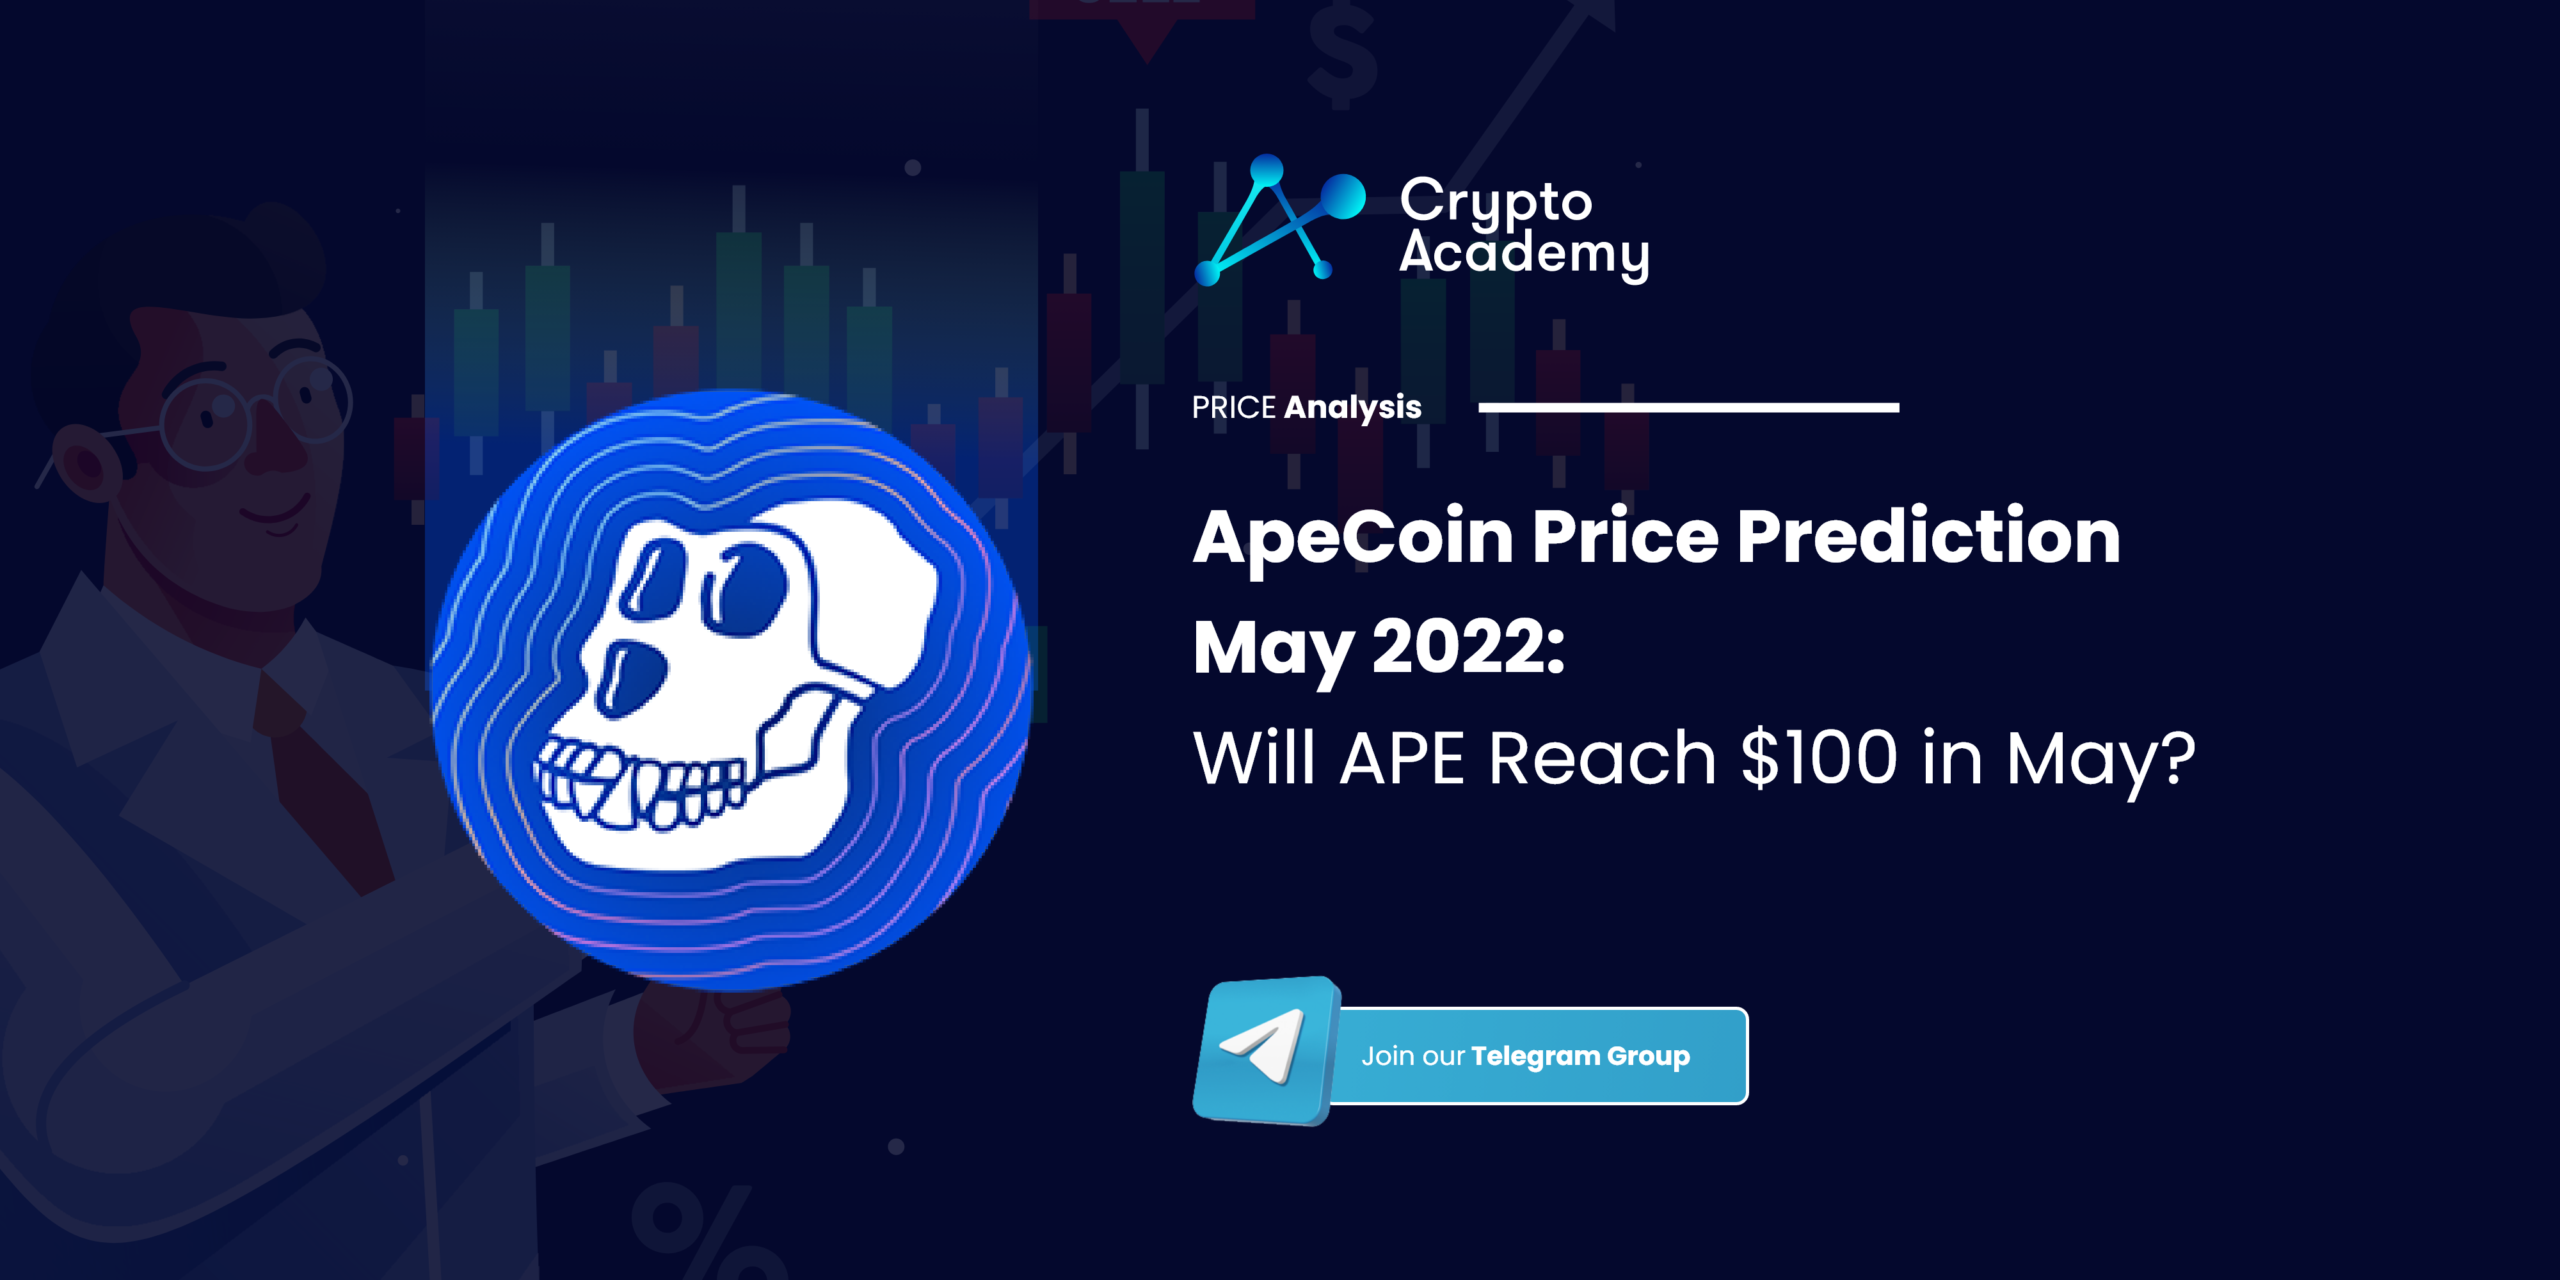 ApeCoin Price Prediction May 2022: Will APE Reach $100 in May?